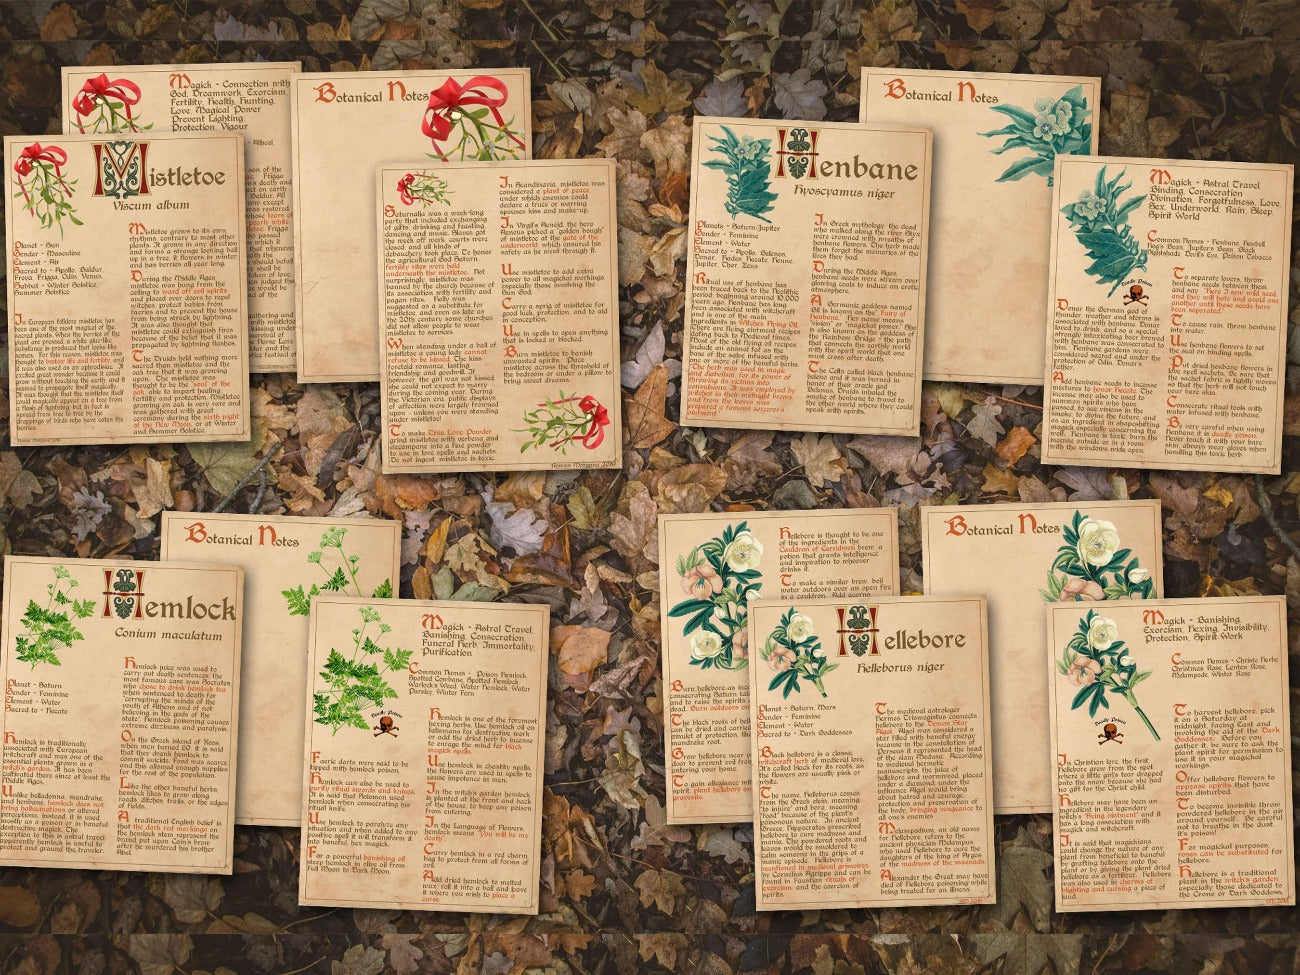 Mistletoe, Henbane, Hemlock, and Hellebore pages BANEFUL HERBS Bundle, 13 Poison Botanicals, 46 Witchcraft Pages of Ritual Poisonous Plants, Wicca Witch Herbal Grimoire of Baneful Plants - Morgana Magick Spell